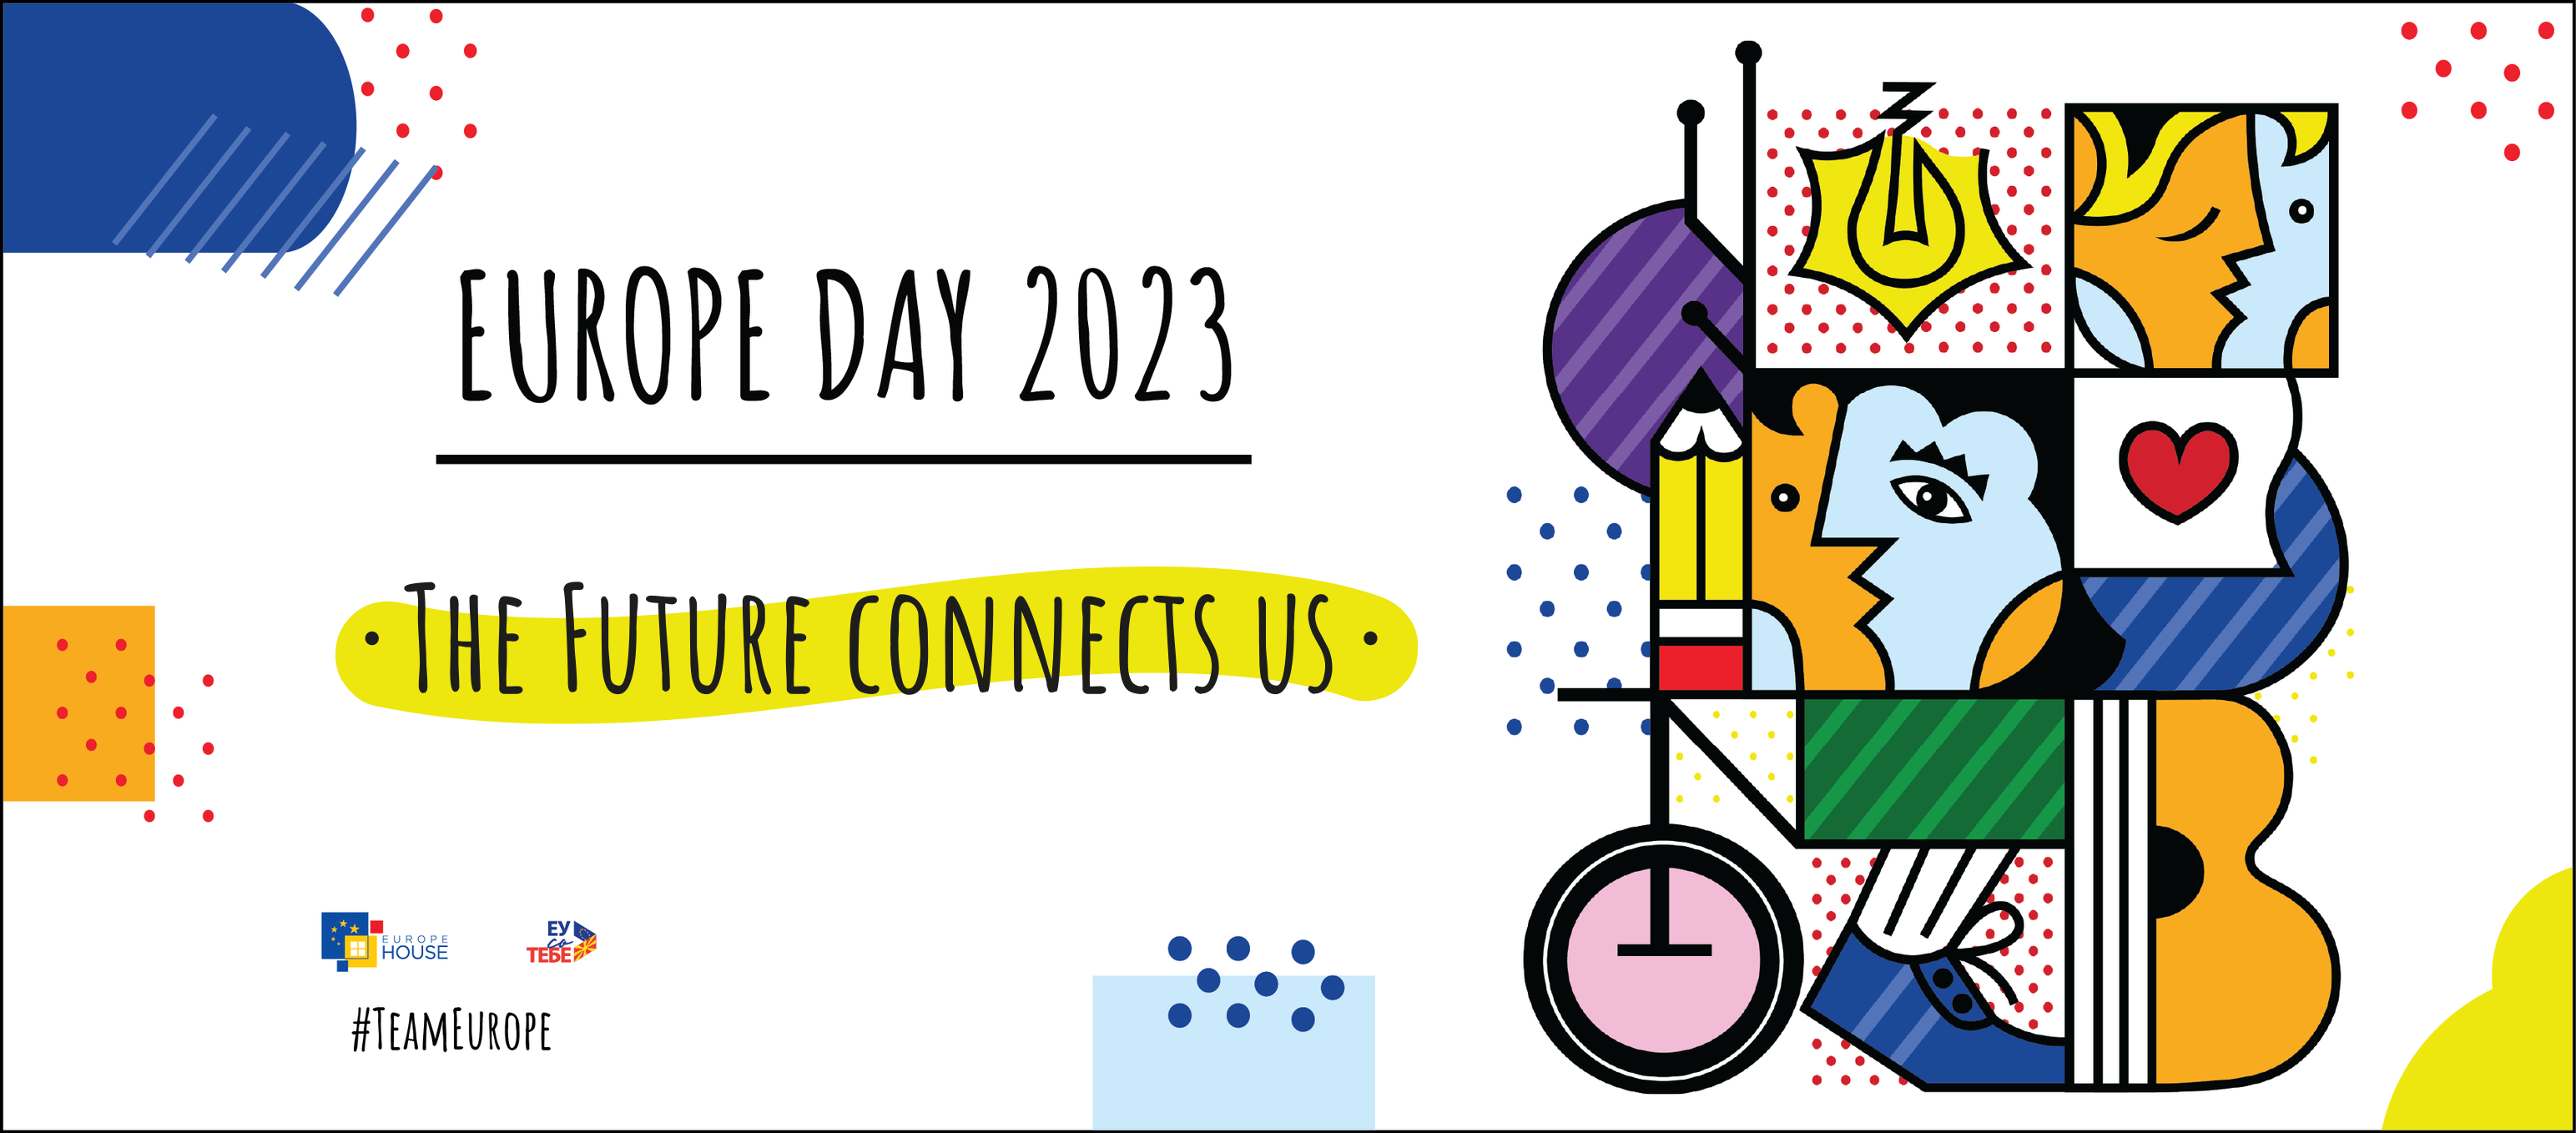 CELEBRATE EUROPE DAY WITH A FUN-FILLED PICNIC AT GAZI BABA PARK UNDER THE SLOGAN “THE FUTURE CONNECTS US!”